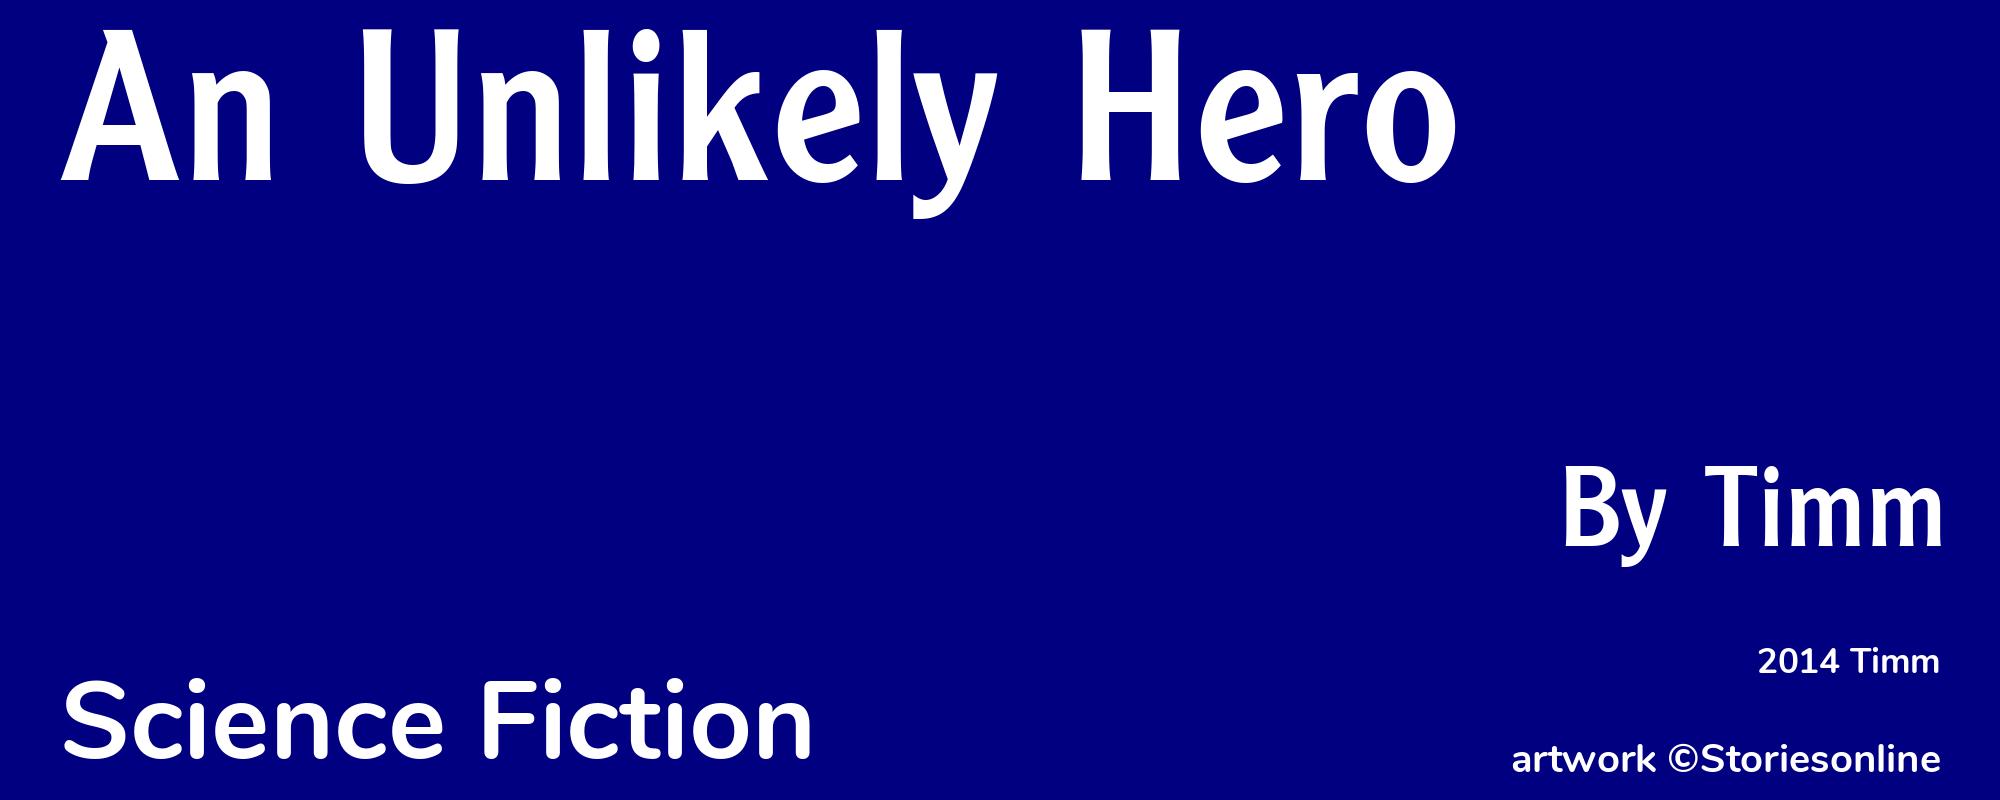 An Unlikely Hero - Cover